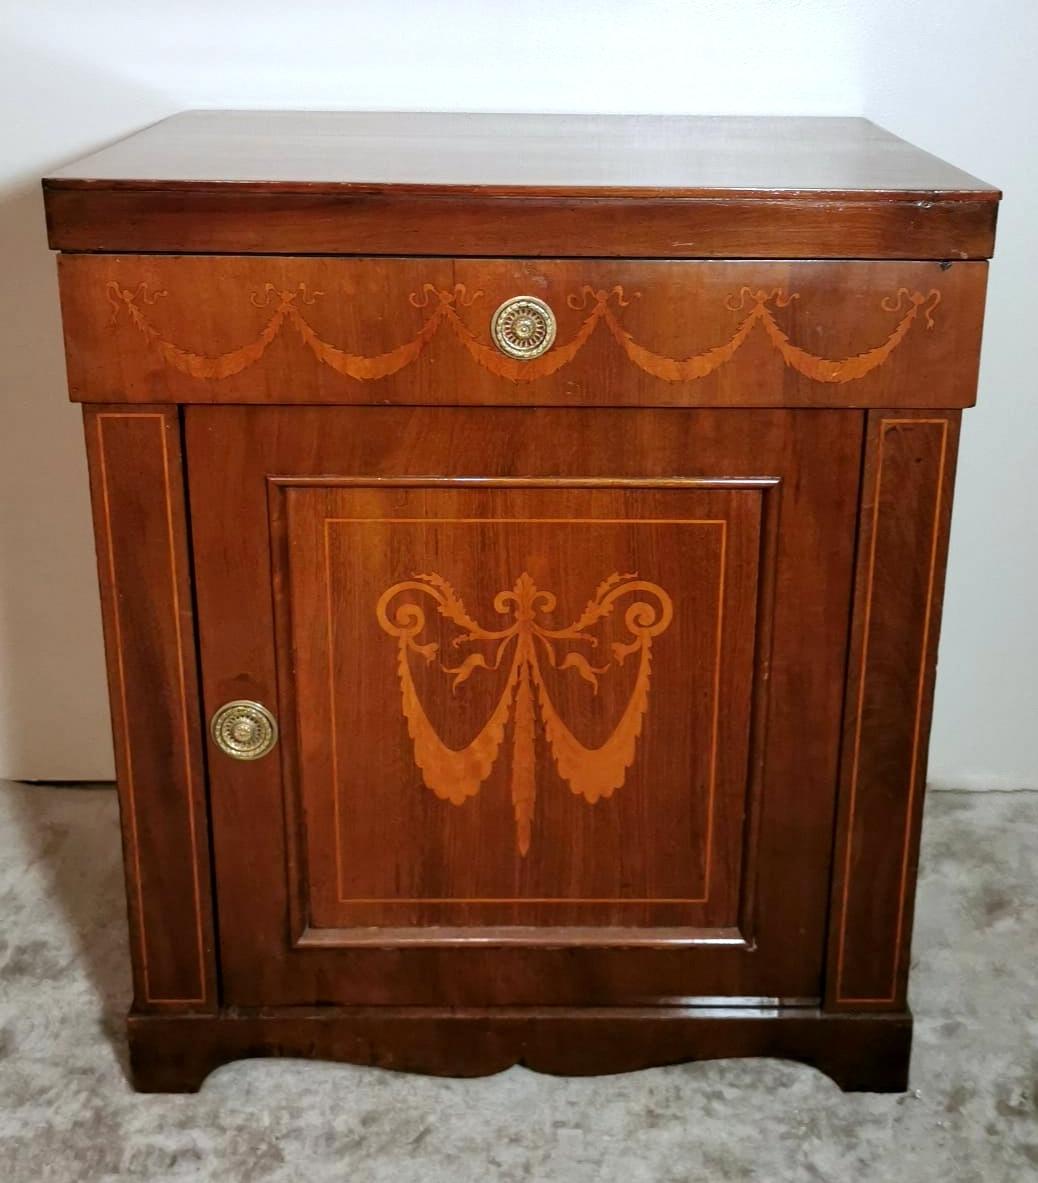 We kindly suggest that you read the whole description, as with it we try to give you detailed technical and historical information to guarantee the authenticity of our objects.
Exceptional and valuable small Italian Biedermeier style sideboard in